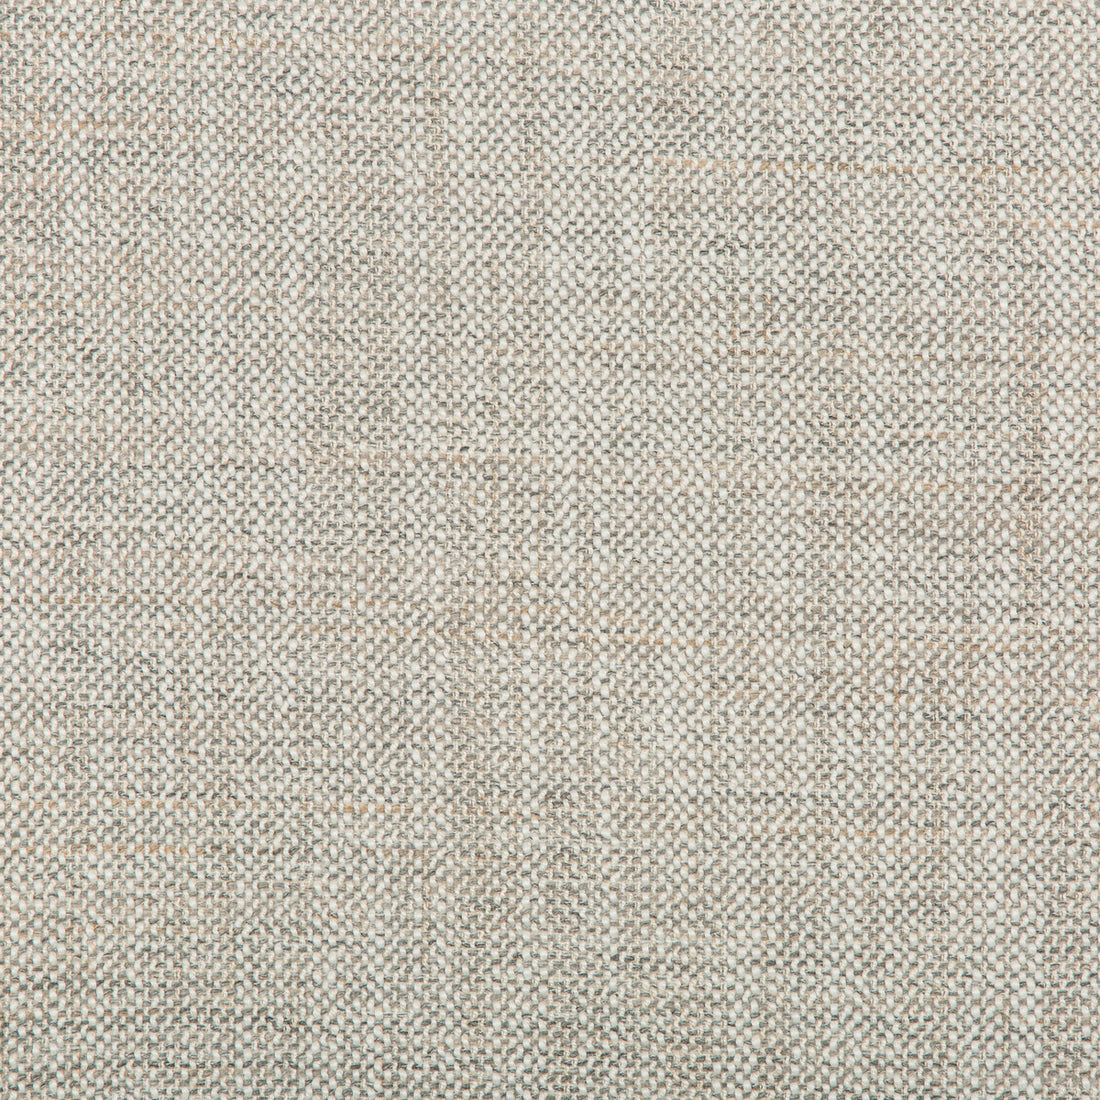 Tonquin fabric in cloud color - pattern 35559.11.0 - by Kravet Couture in the Modern Colors-Sojourn Collection collection